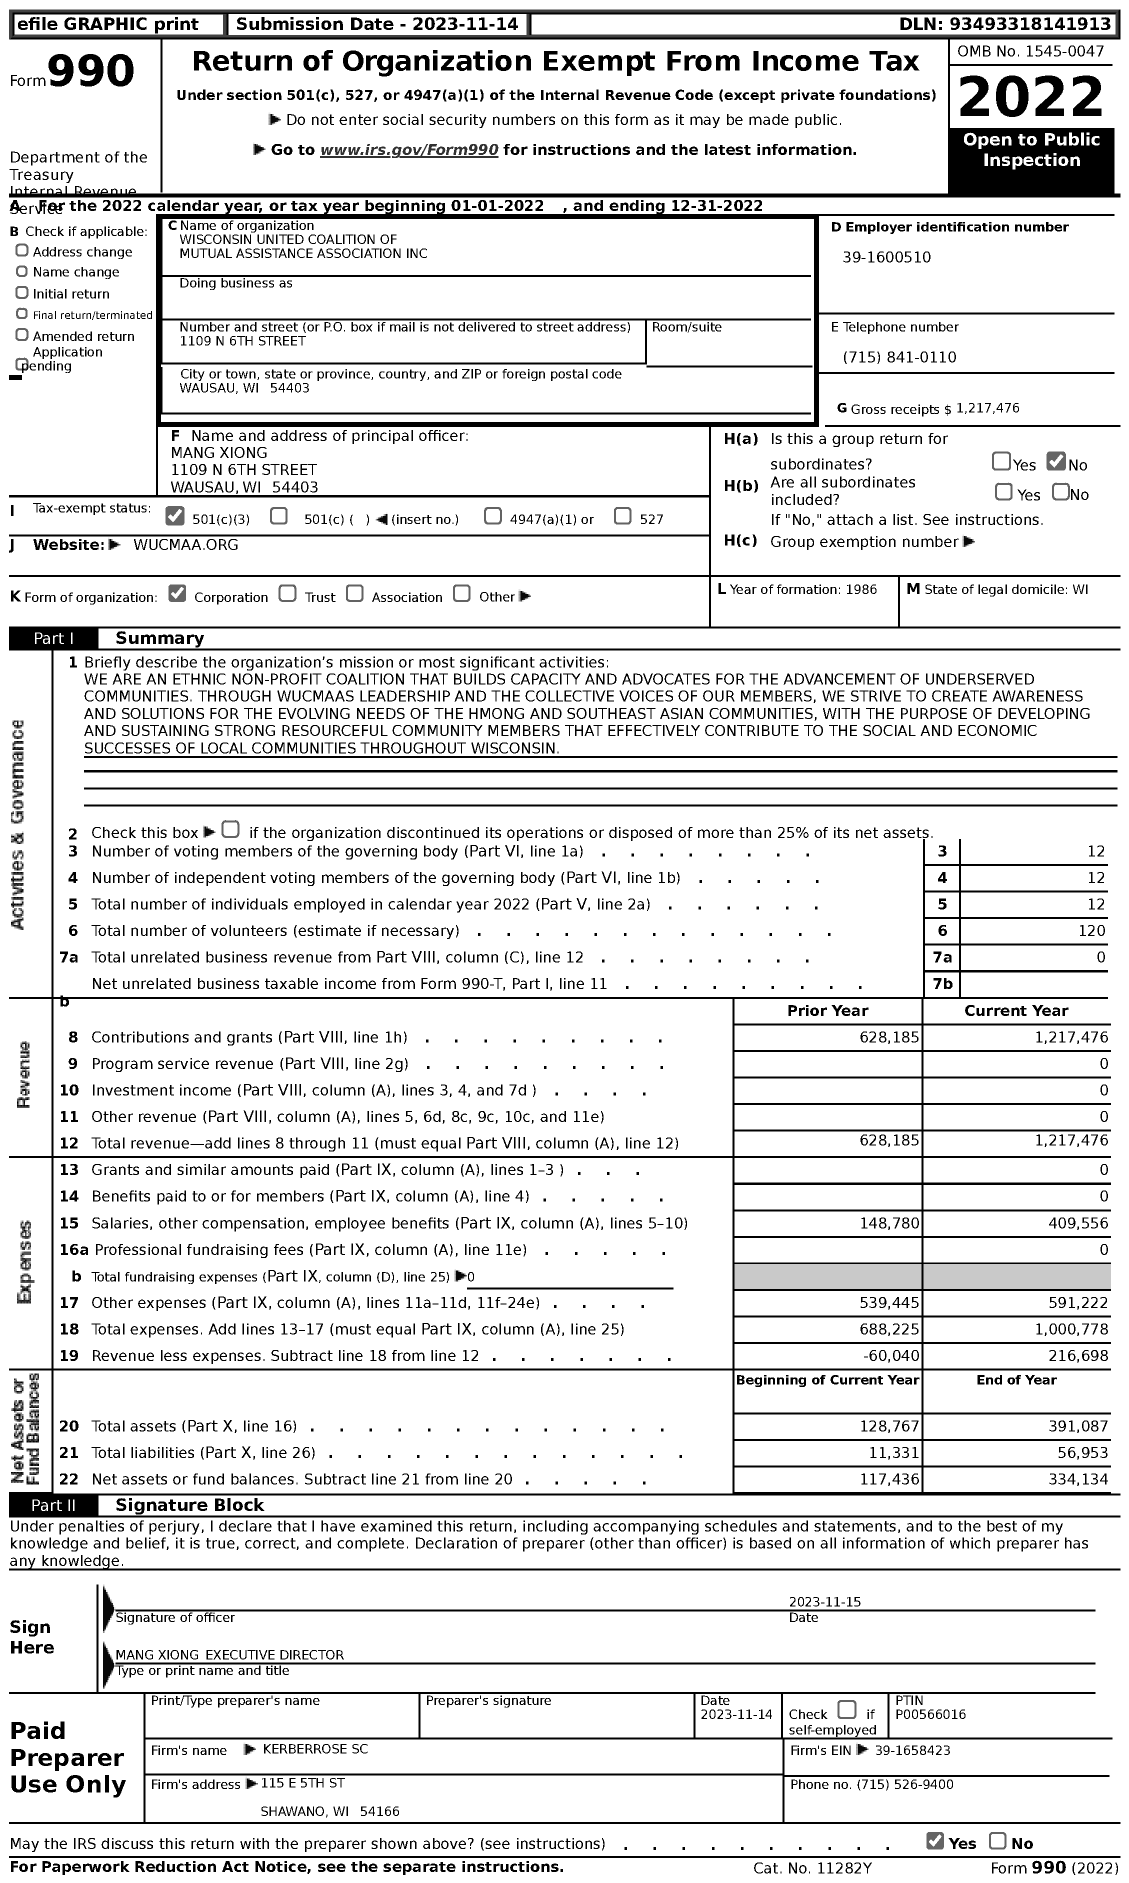 Image of first page of 2022 Form 990 for Wisconsin United Coalition of Mutual Assistance Association